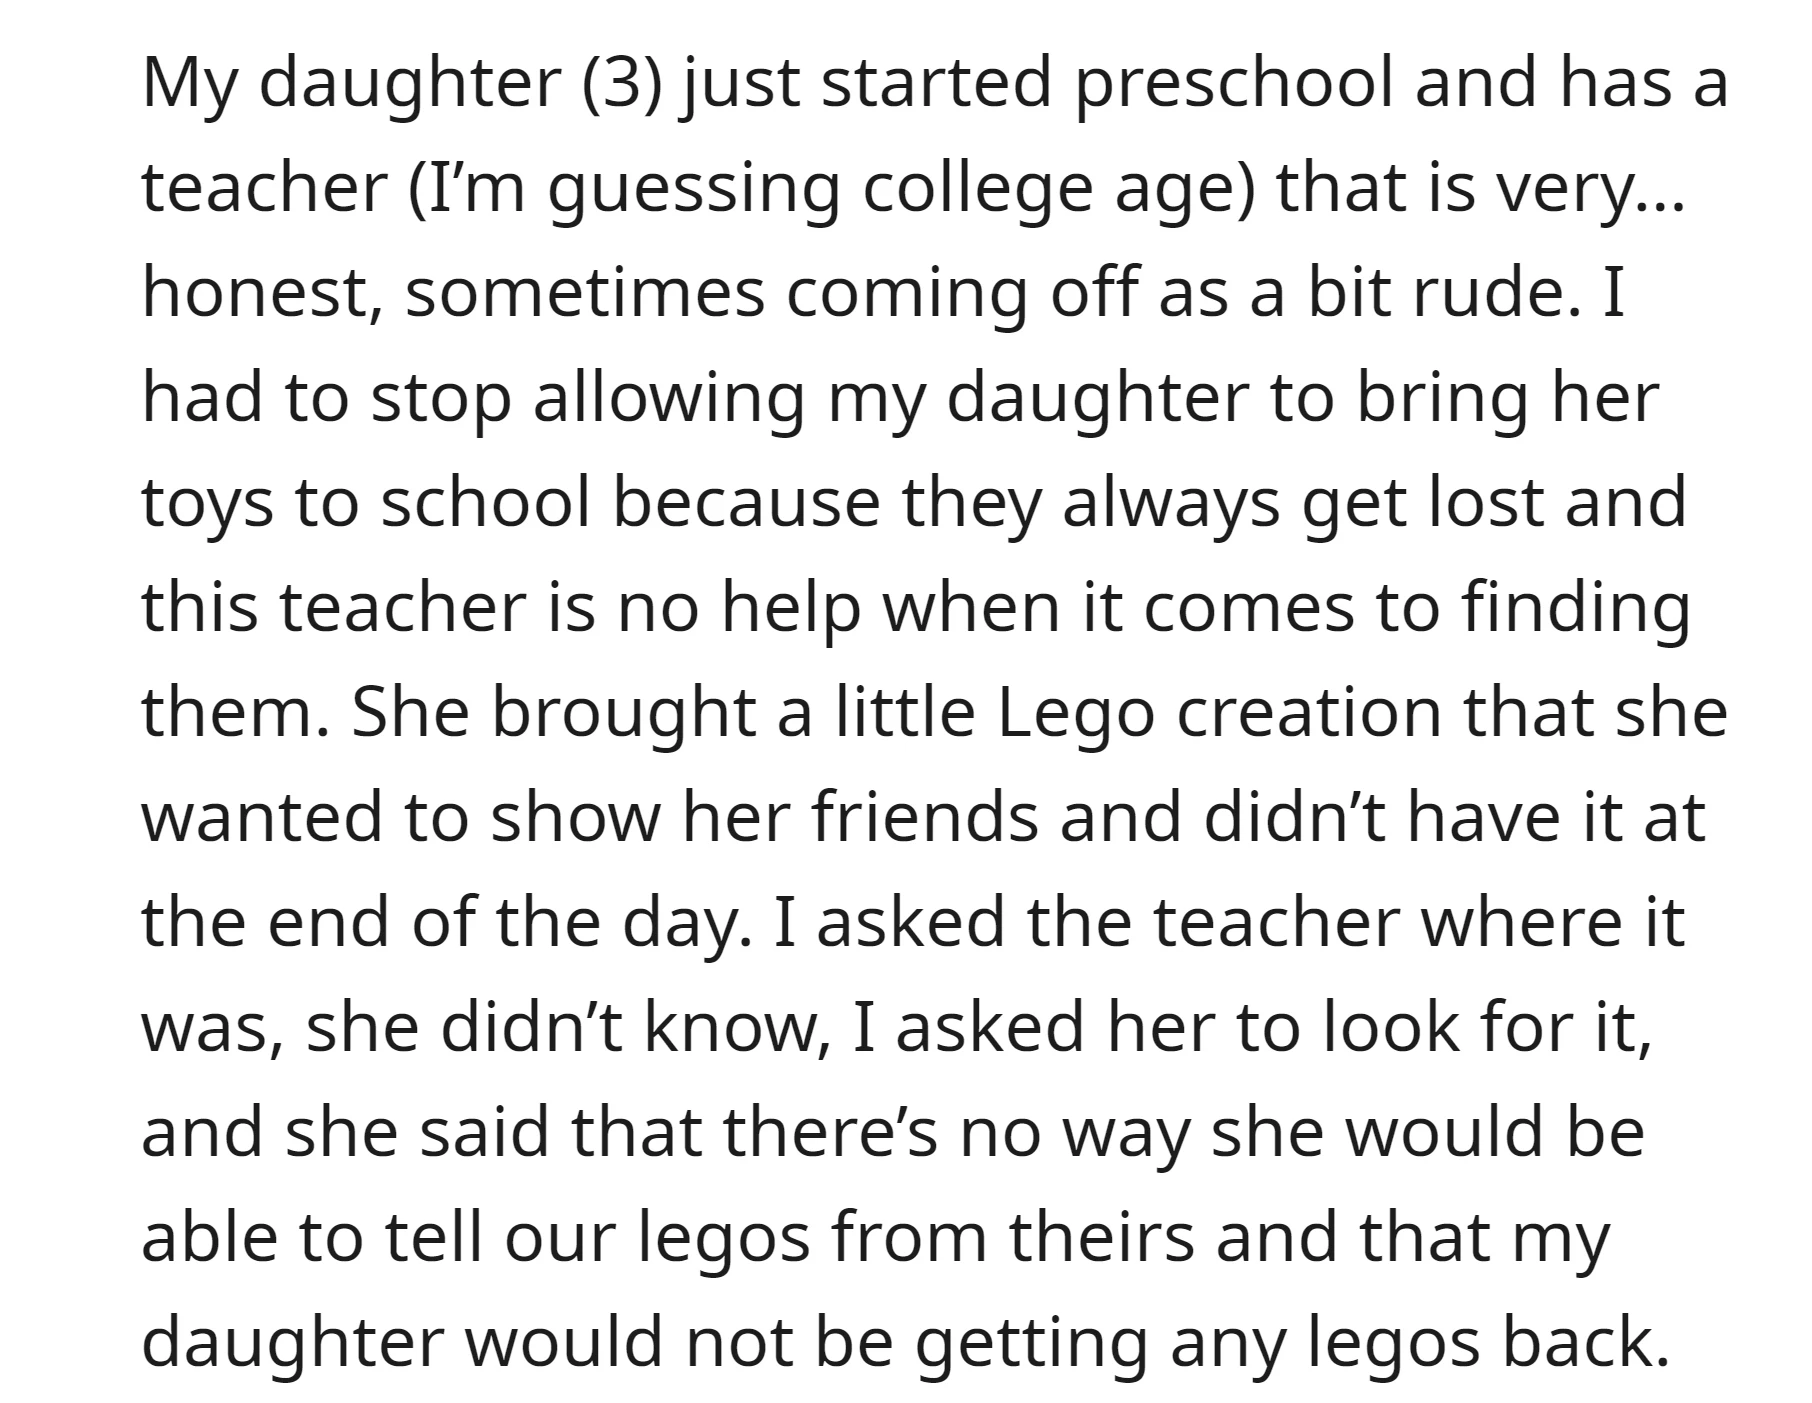 Teacher of OP's daughter refused to help find her lost Lego creation